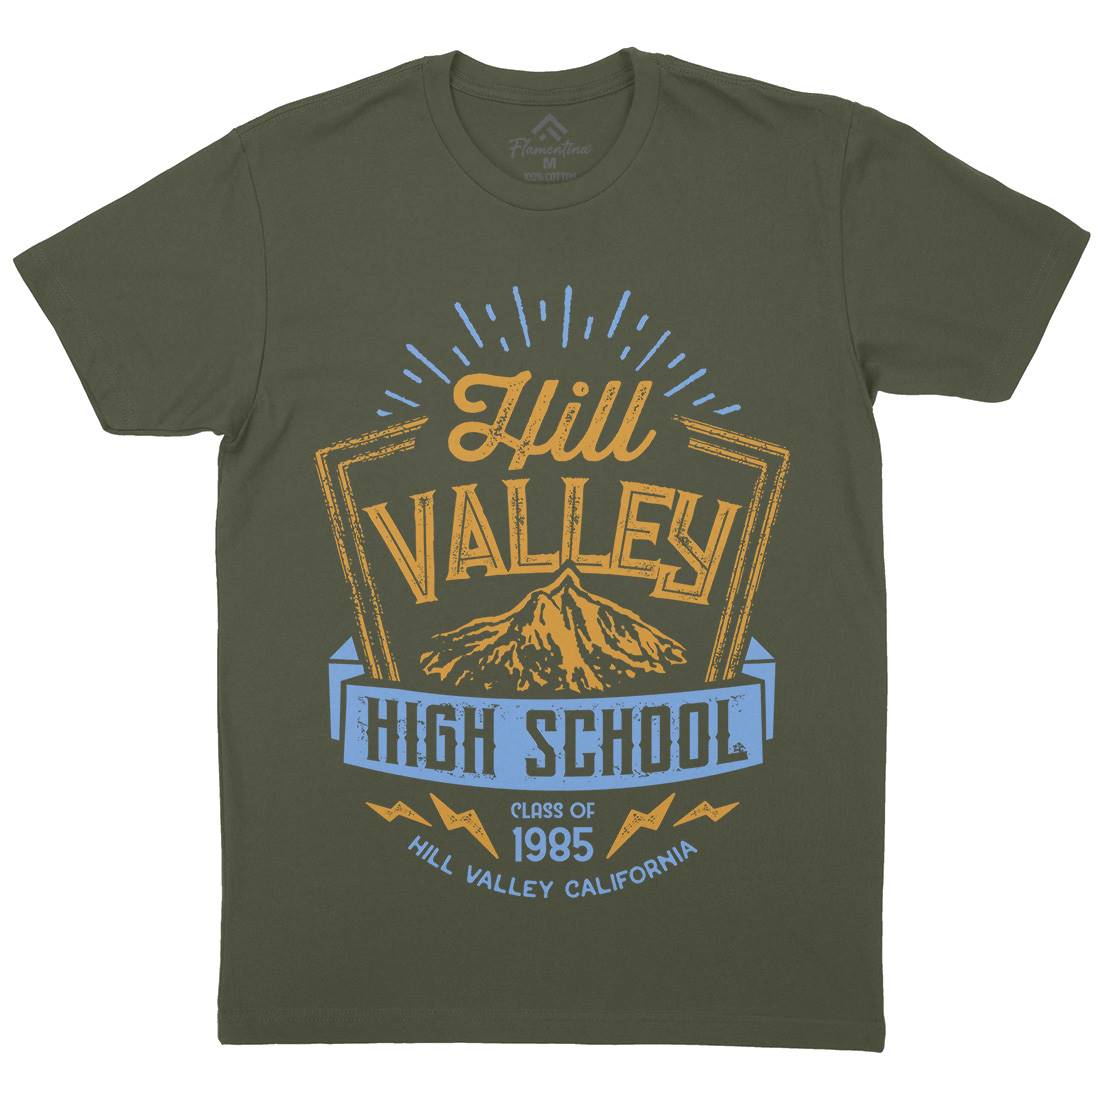 Hill Valley Mens Crew Neck T-Shirt Space D432